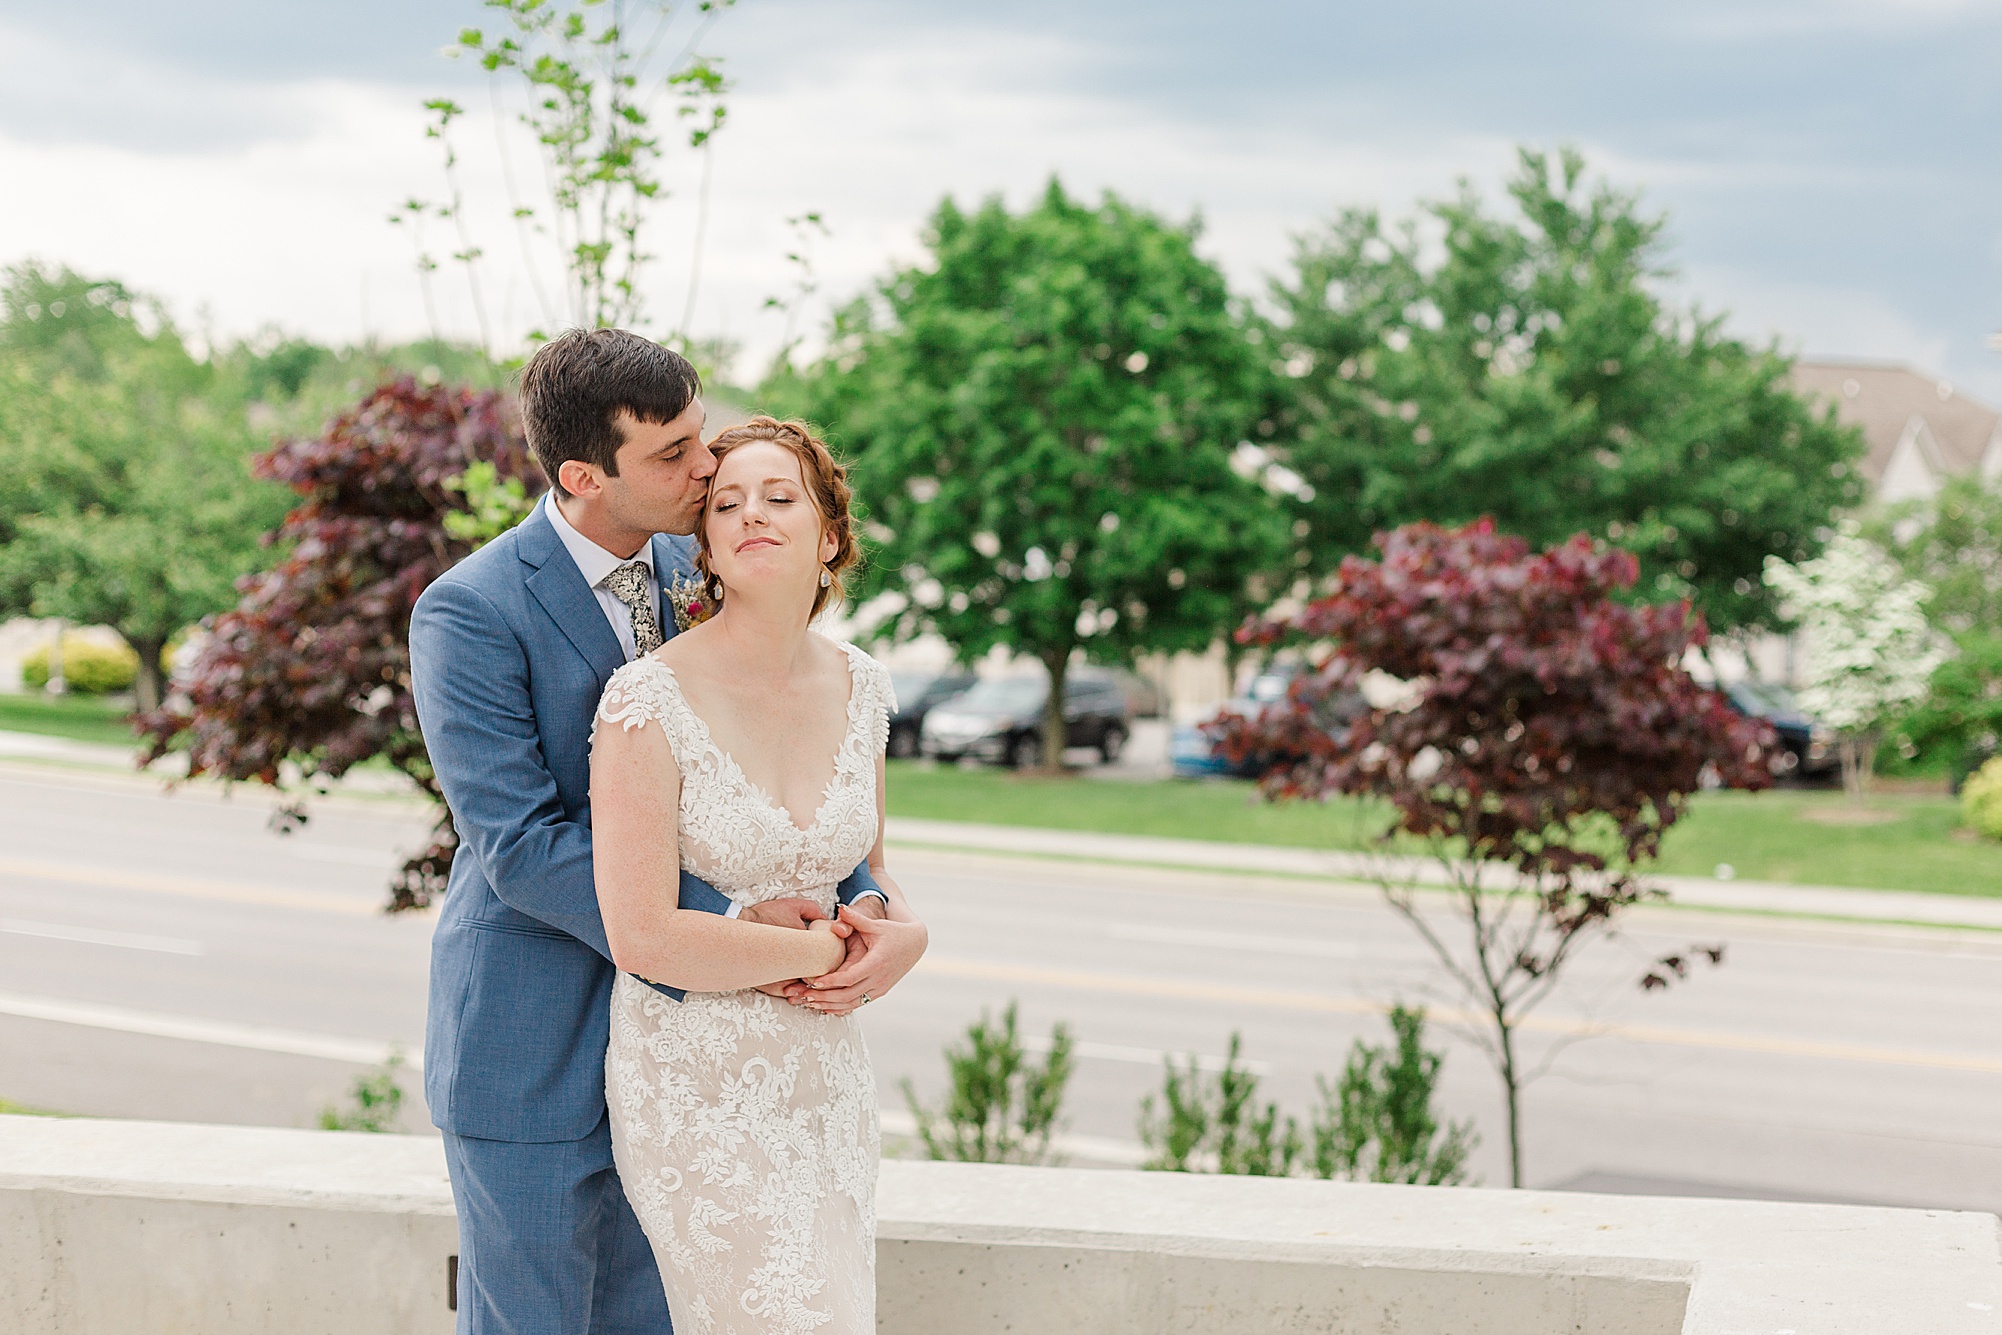 Bride and Groom Portraits at Wedding at Virginia Tech. Wedding Photography by Kailey Brianne Photography